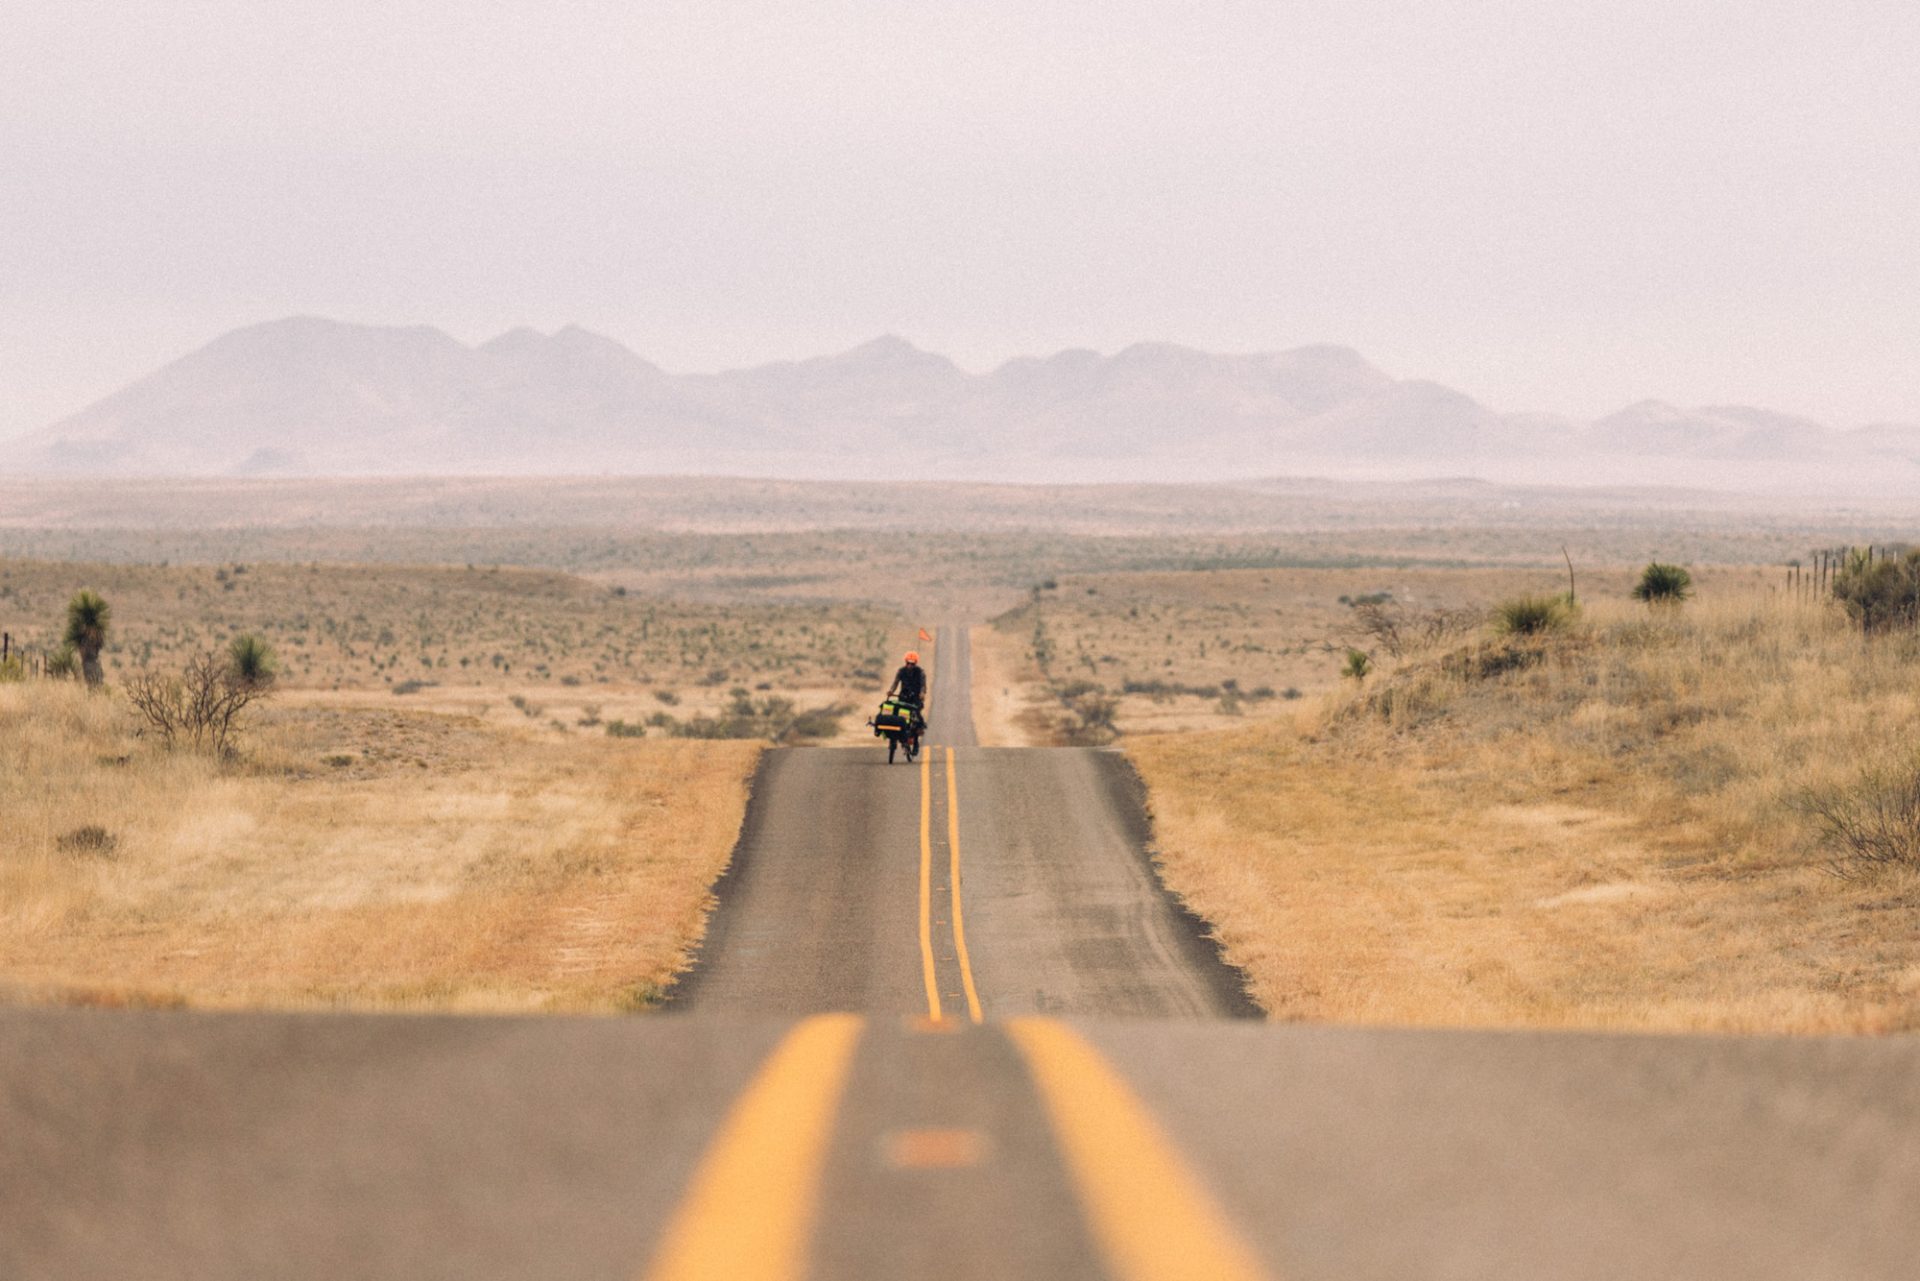 Binggeser rides his cargo bike on a lonely road in the desert. The two-lane tarmac stretches away into the distance over small rollers, with mountains in the background. There is no sign of human life except Erik.